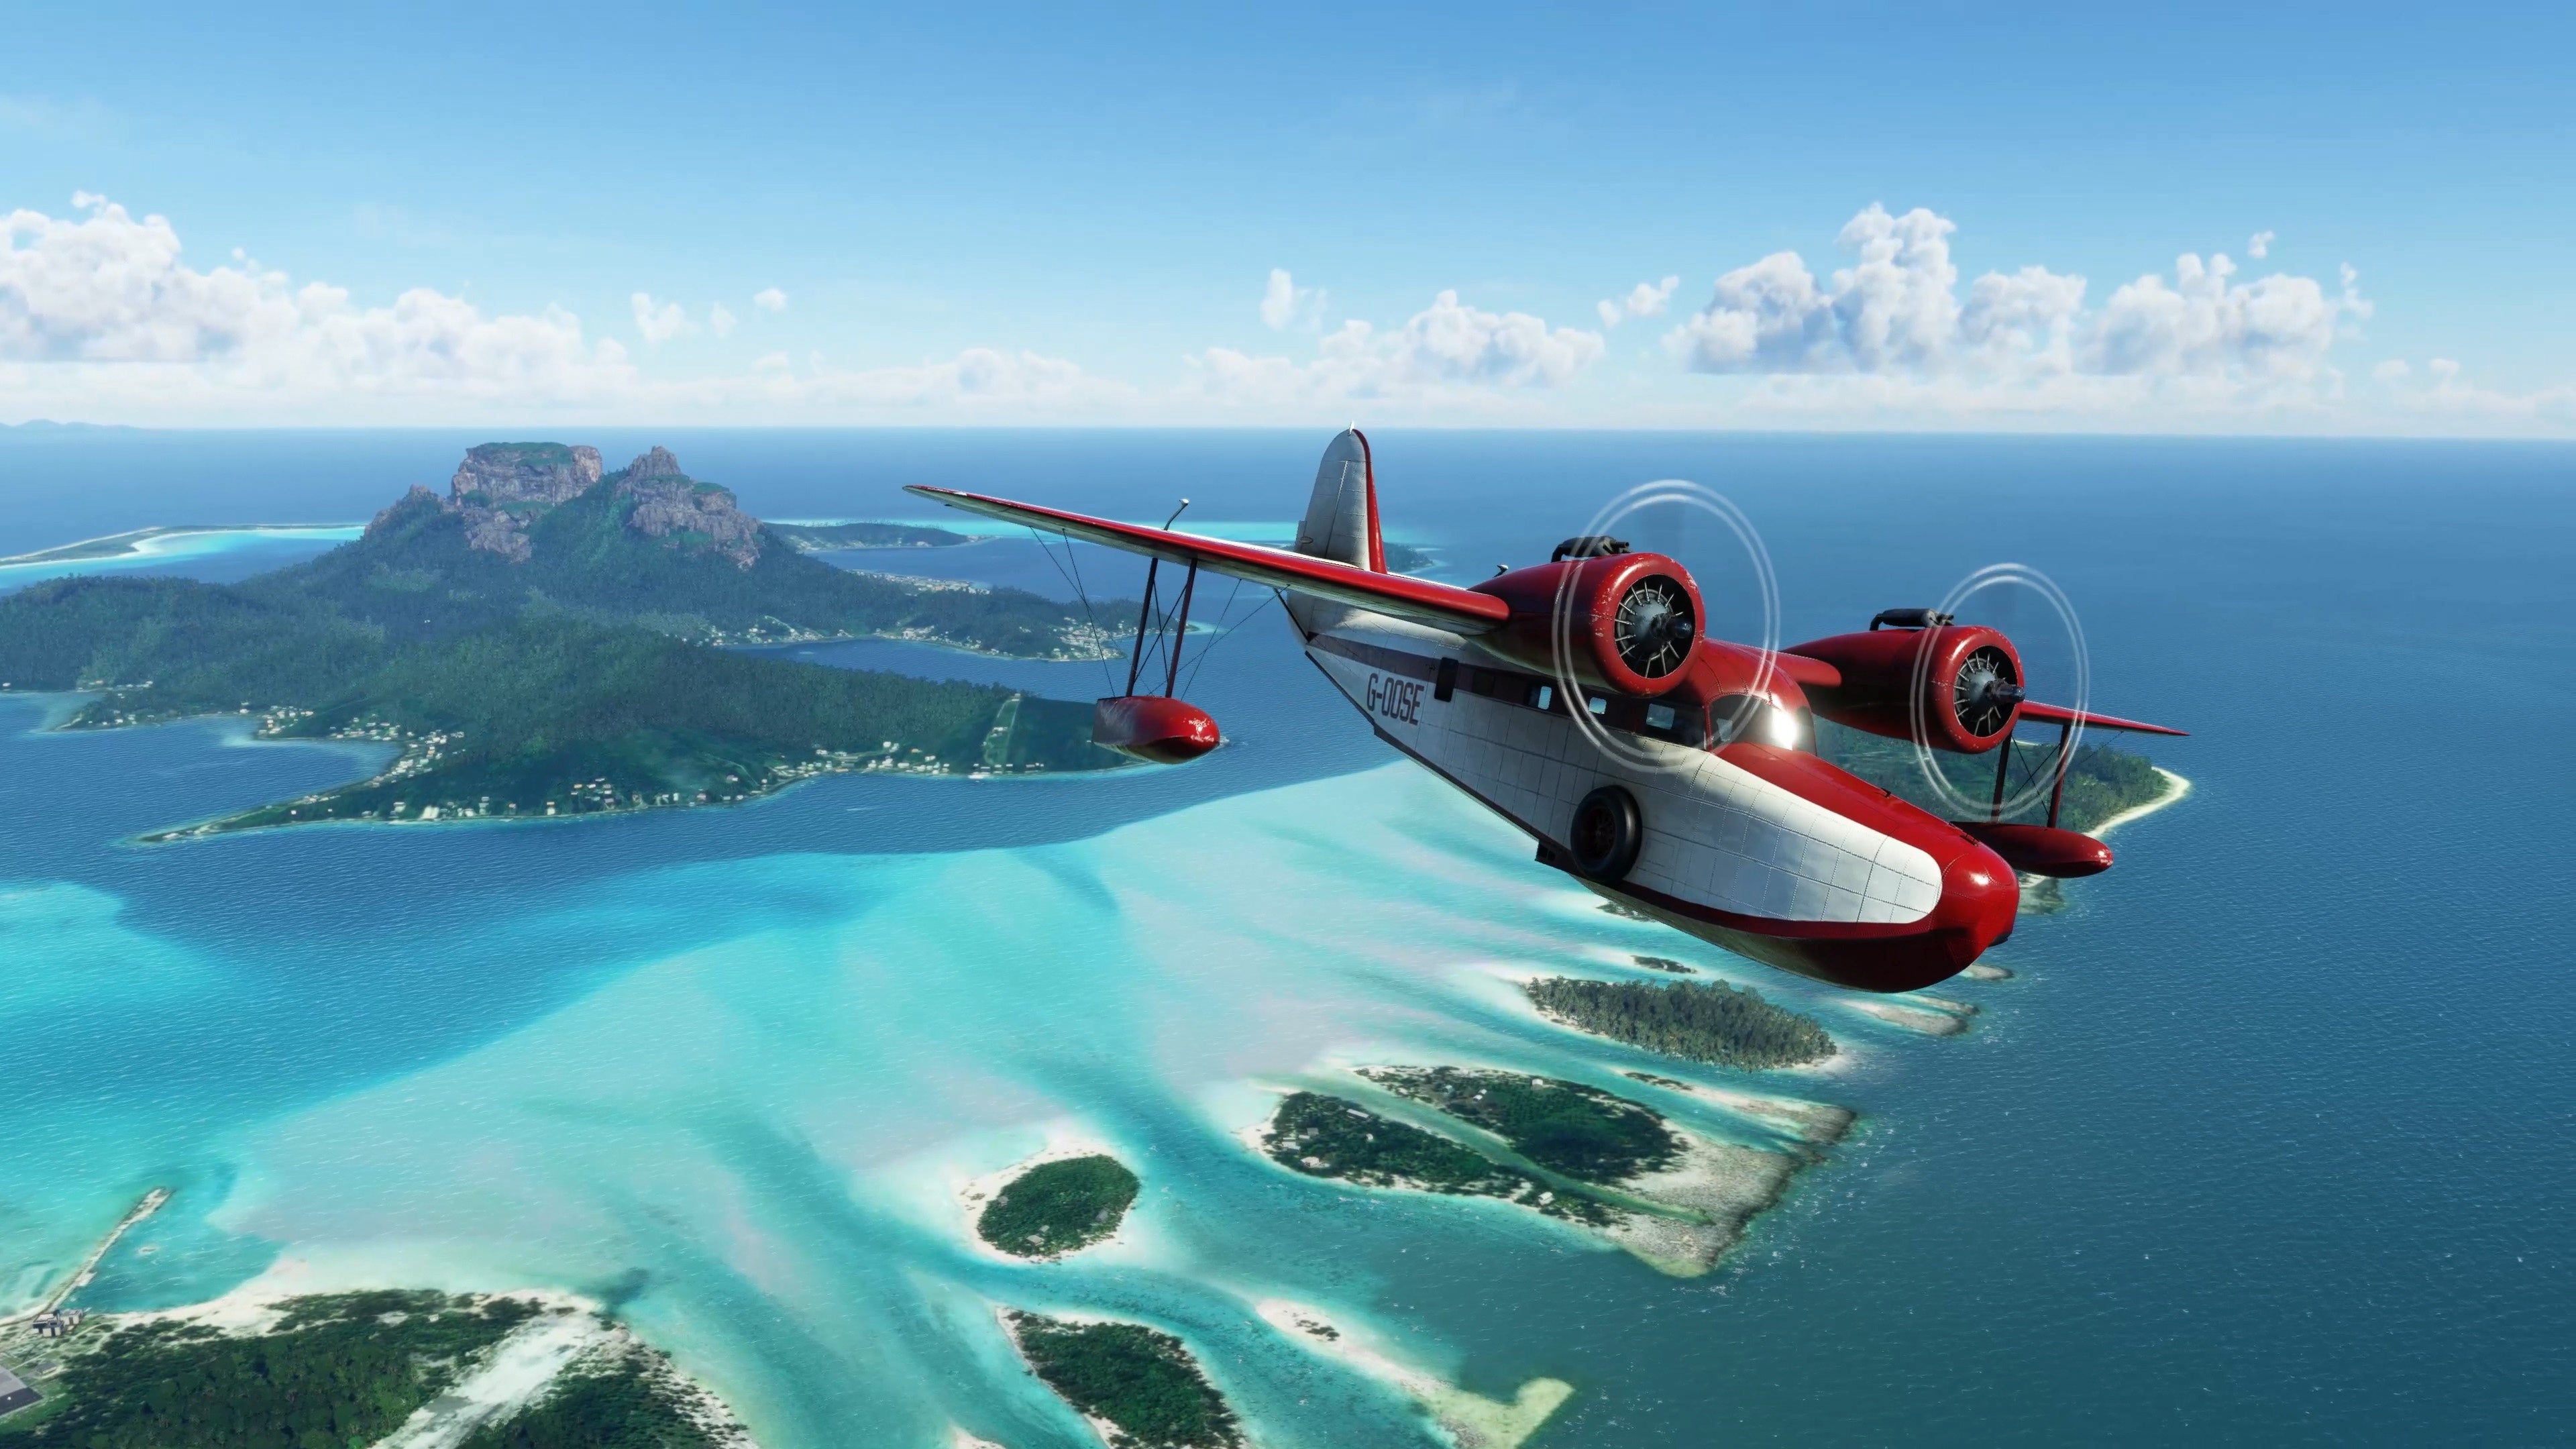 Image for Over 10 million folks have earned their pilot wings in Microsoft Flight Simulator